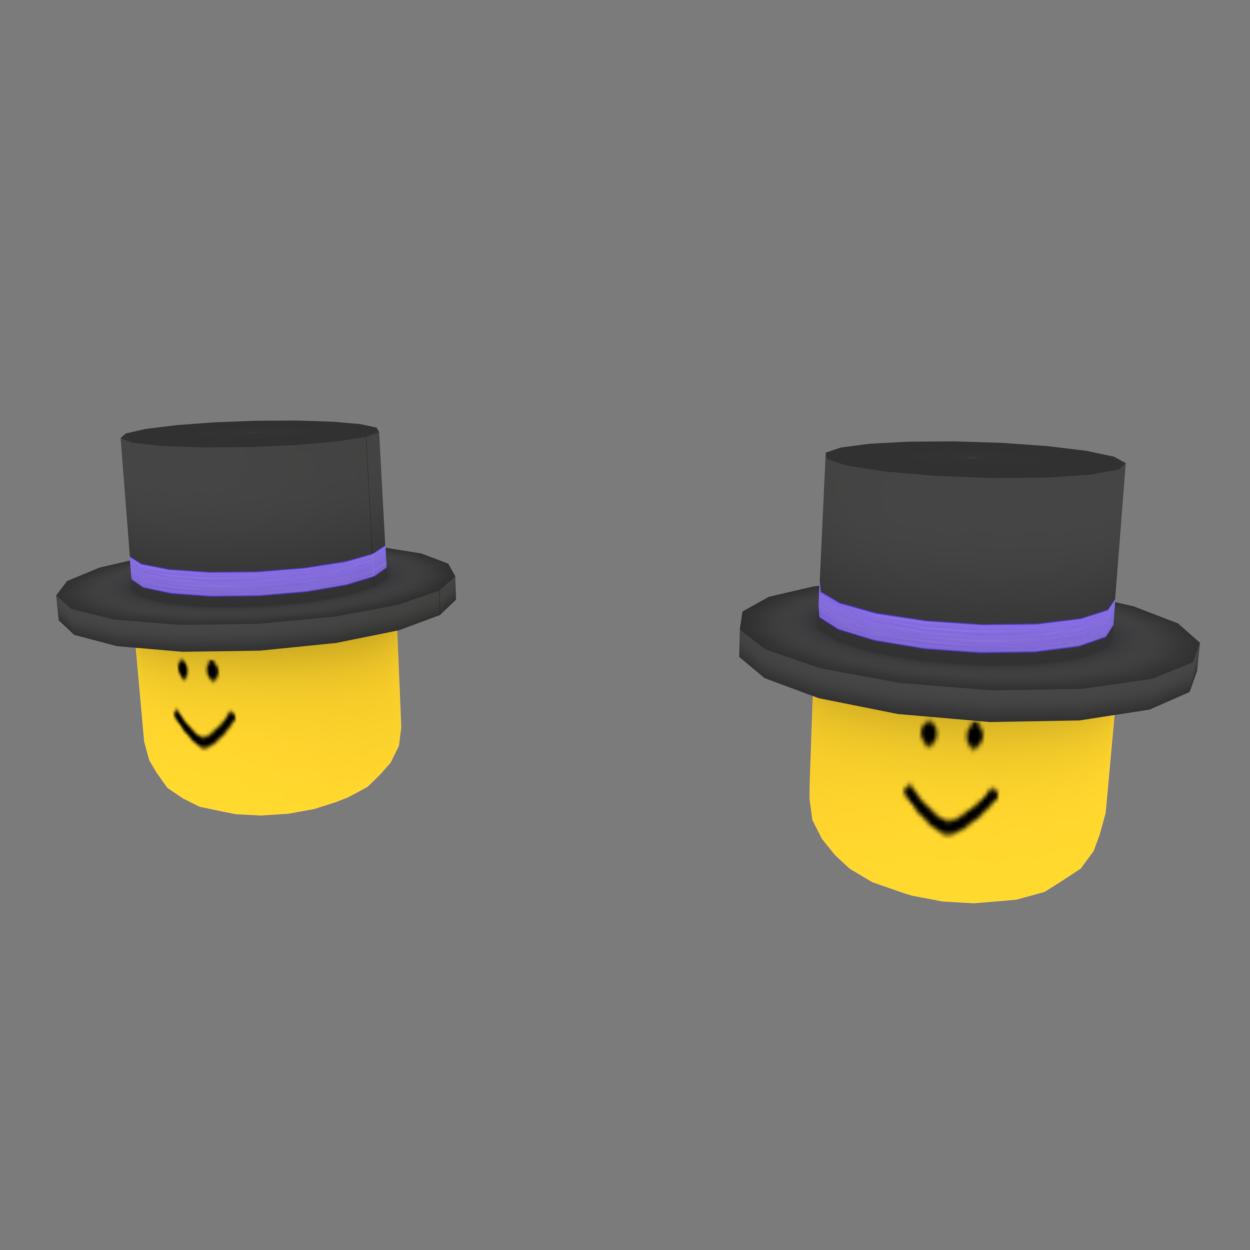 Mas On Twitter Ugc Concept 9 Top Hat Headrow Price 555r Timer 6 Hrs Description Your Two Extra Heads Get Top Hats But Not You - how to get the peabrain head in roblox